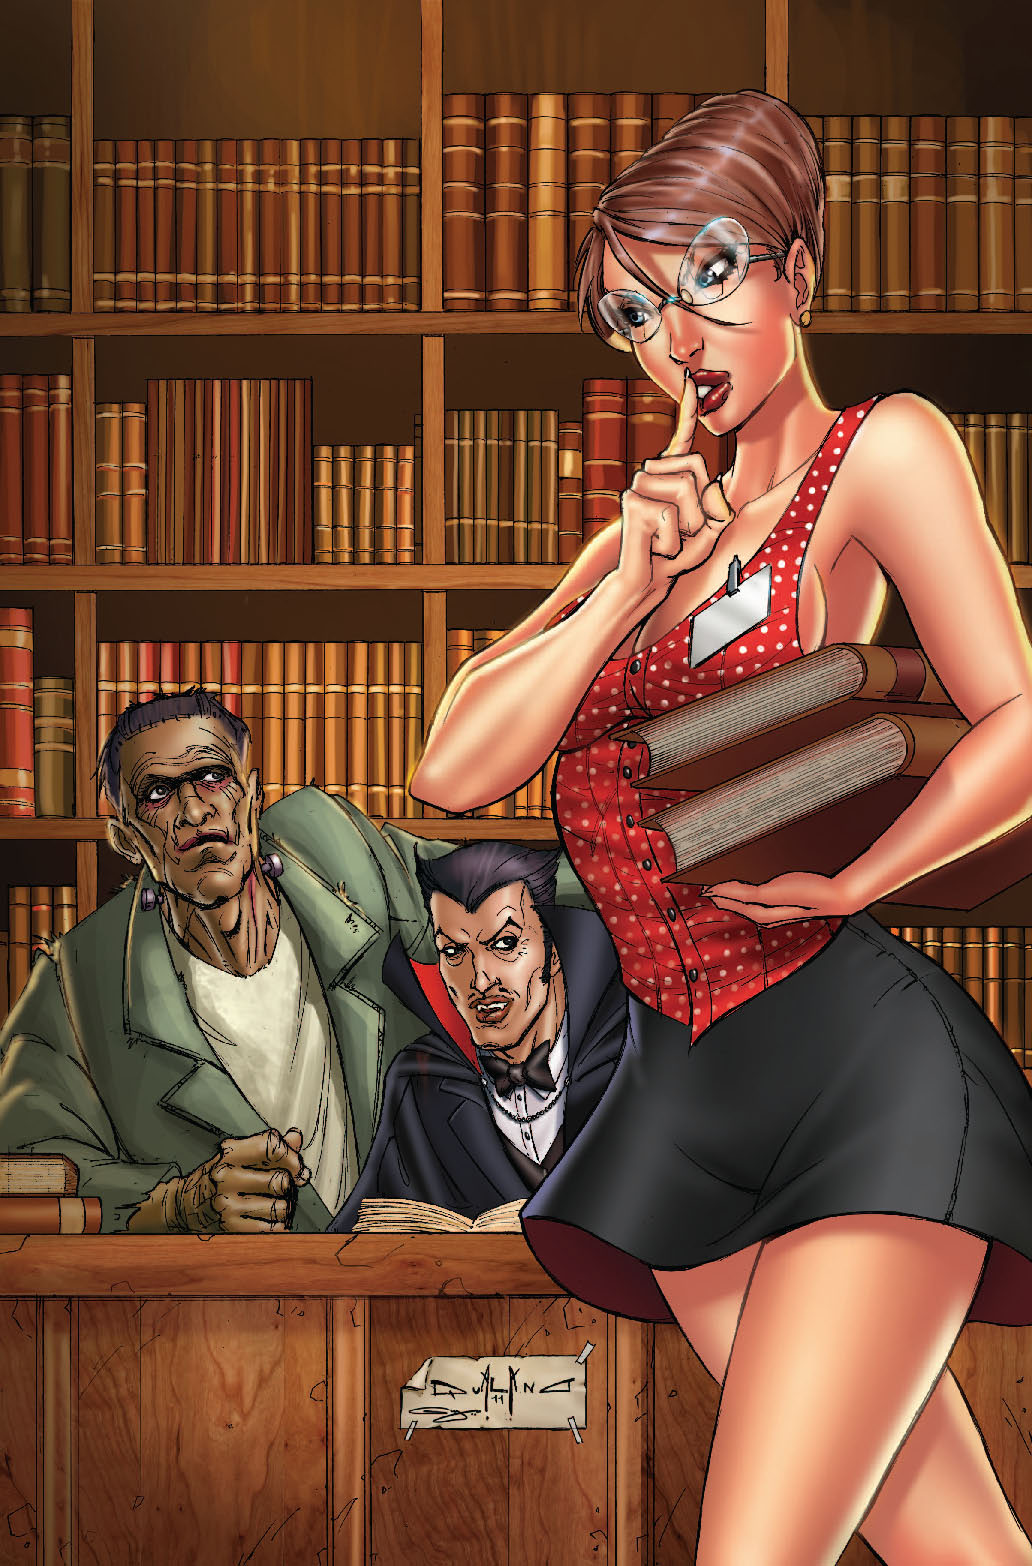 Grimm Fairy Tales: The Library Issue #4